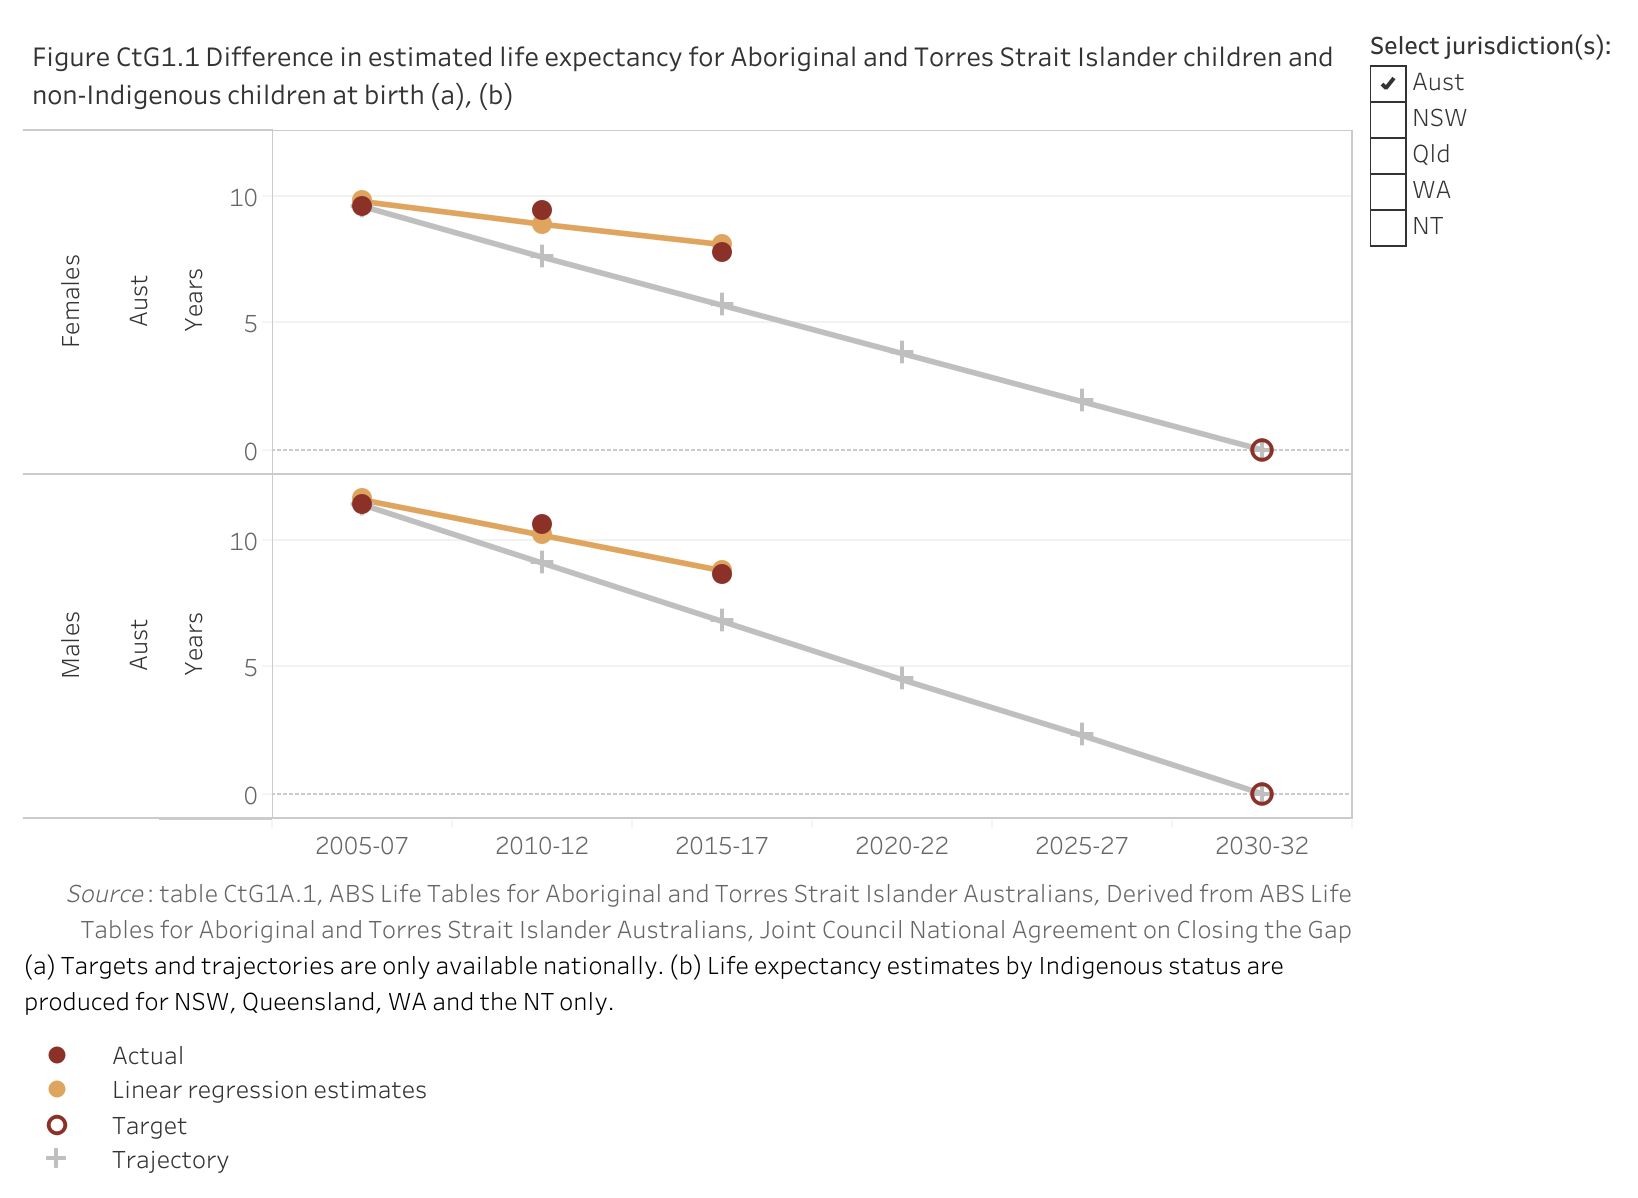 Figure CtG1.1 shows the difference in estimated life expectancy for Aboriginal and Torres Strait Islander children and non-Indigenous children at birth. More details can be found within the text near this image.